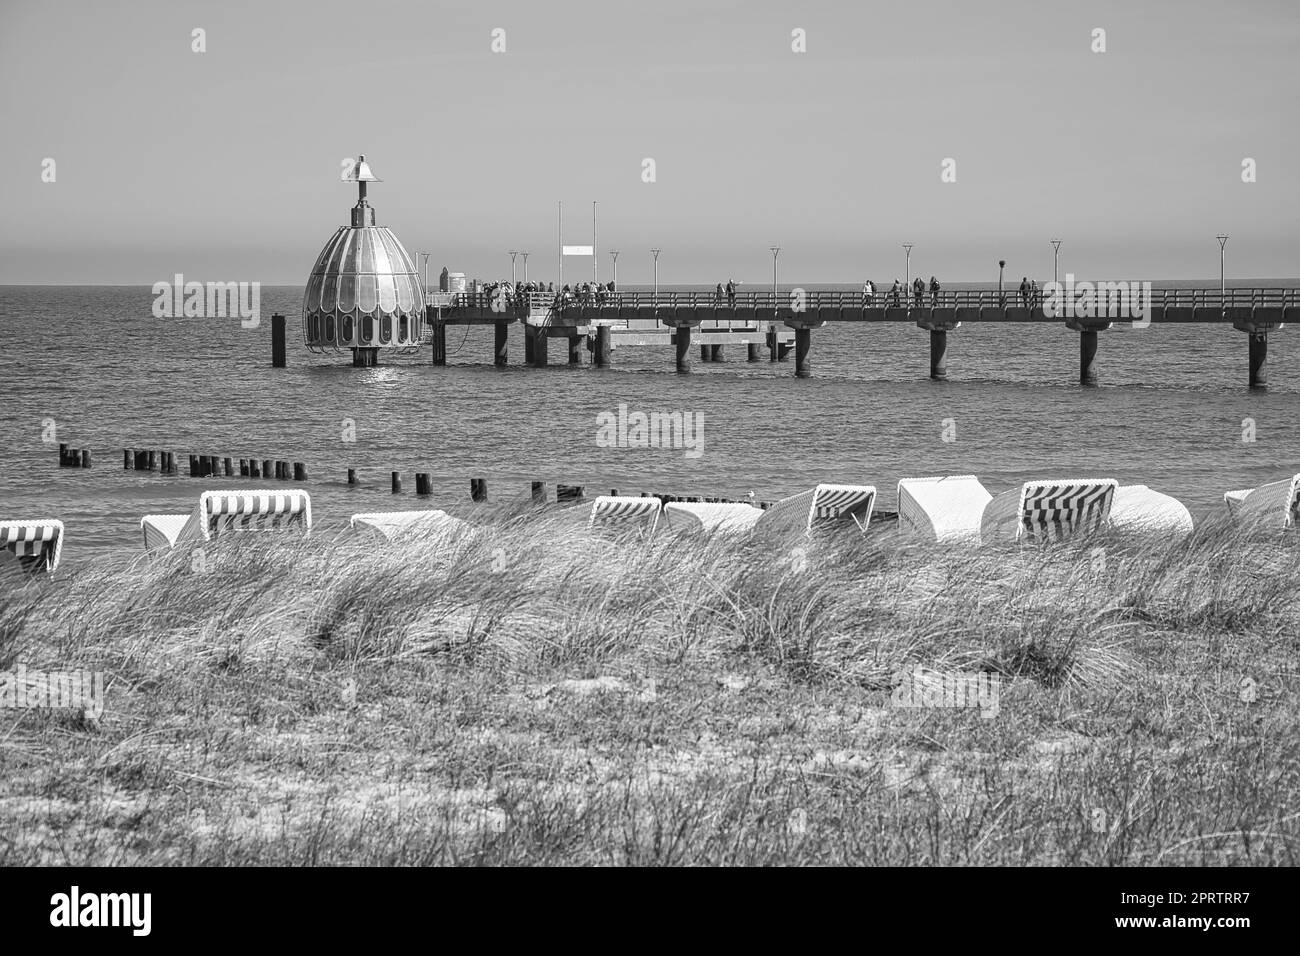 on the coast of the baltic sea on zingst. the pier and the groynes that reach into the water. Stock Photo